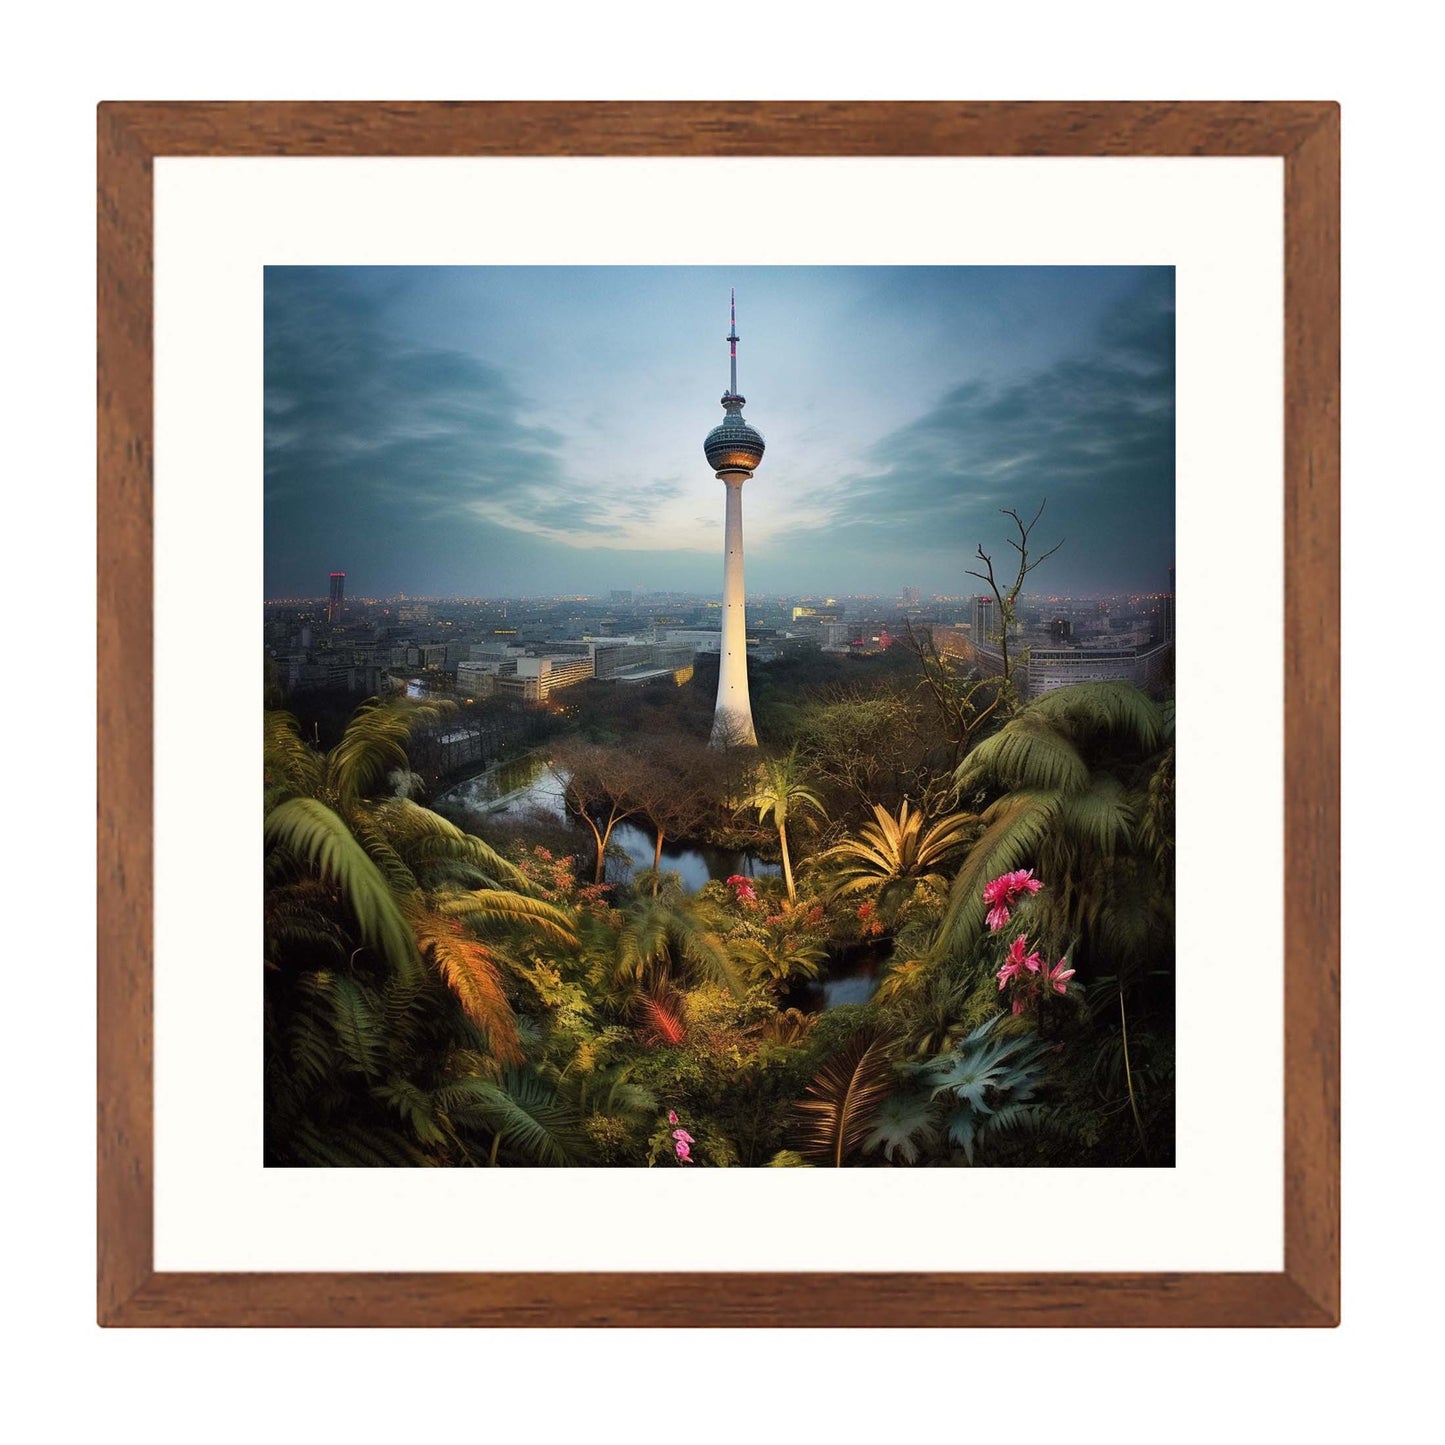 Berlin TV Tower - mural in the Urban Jungle style